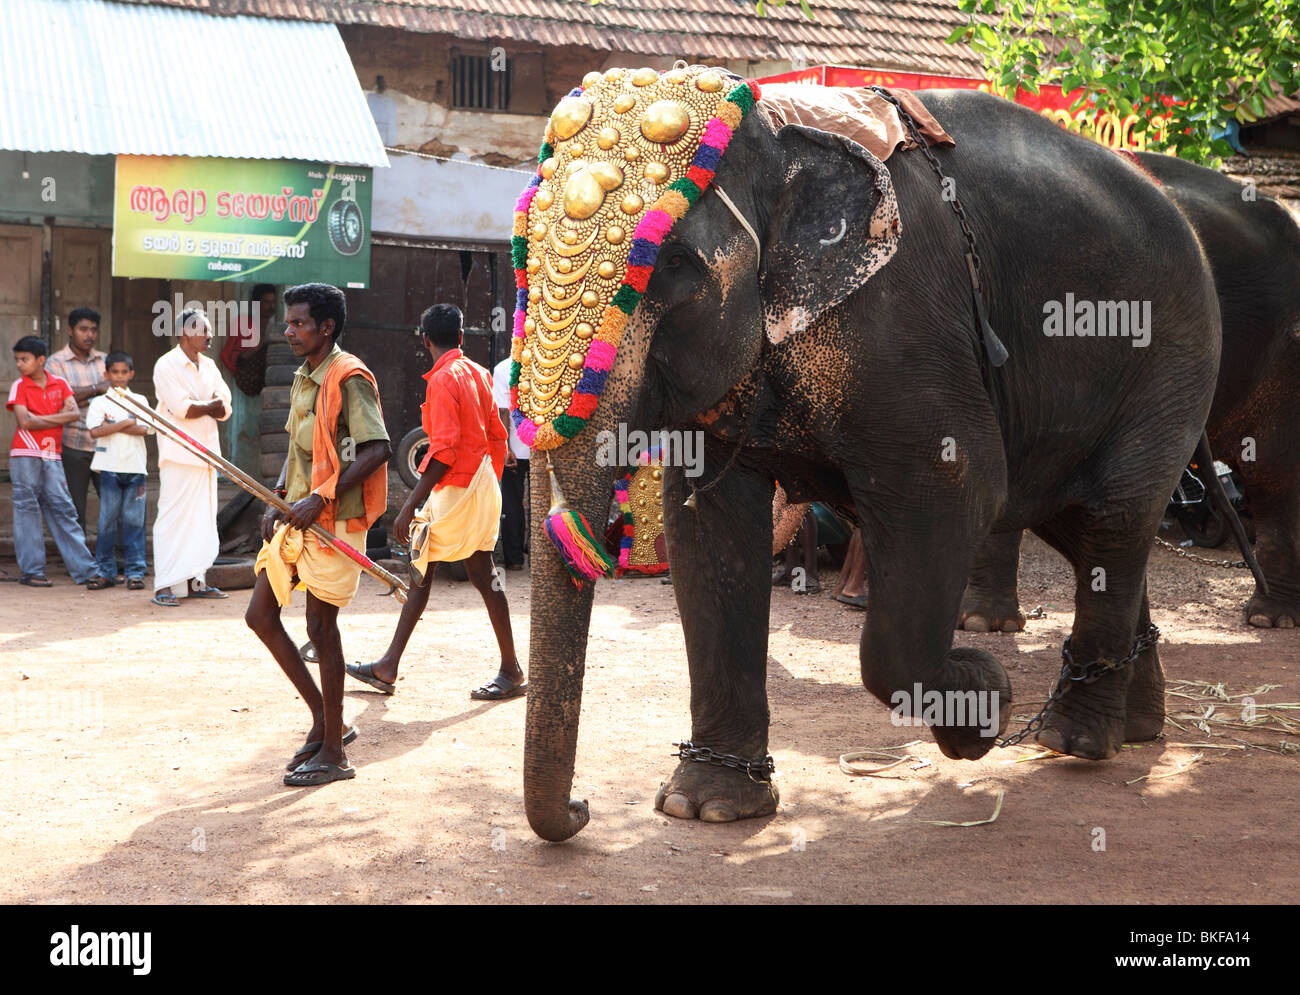 A mahout leads a caparisoned elephant to the line-up at a temple festival in Varkala, Kerala, India. Stock Photo